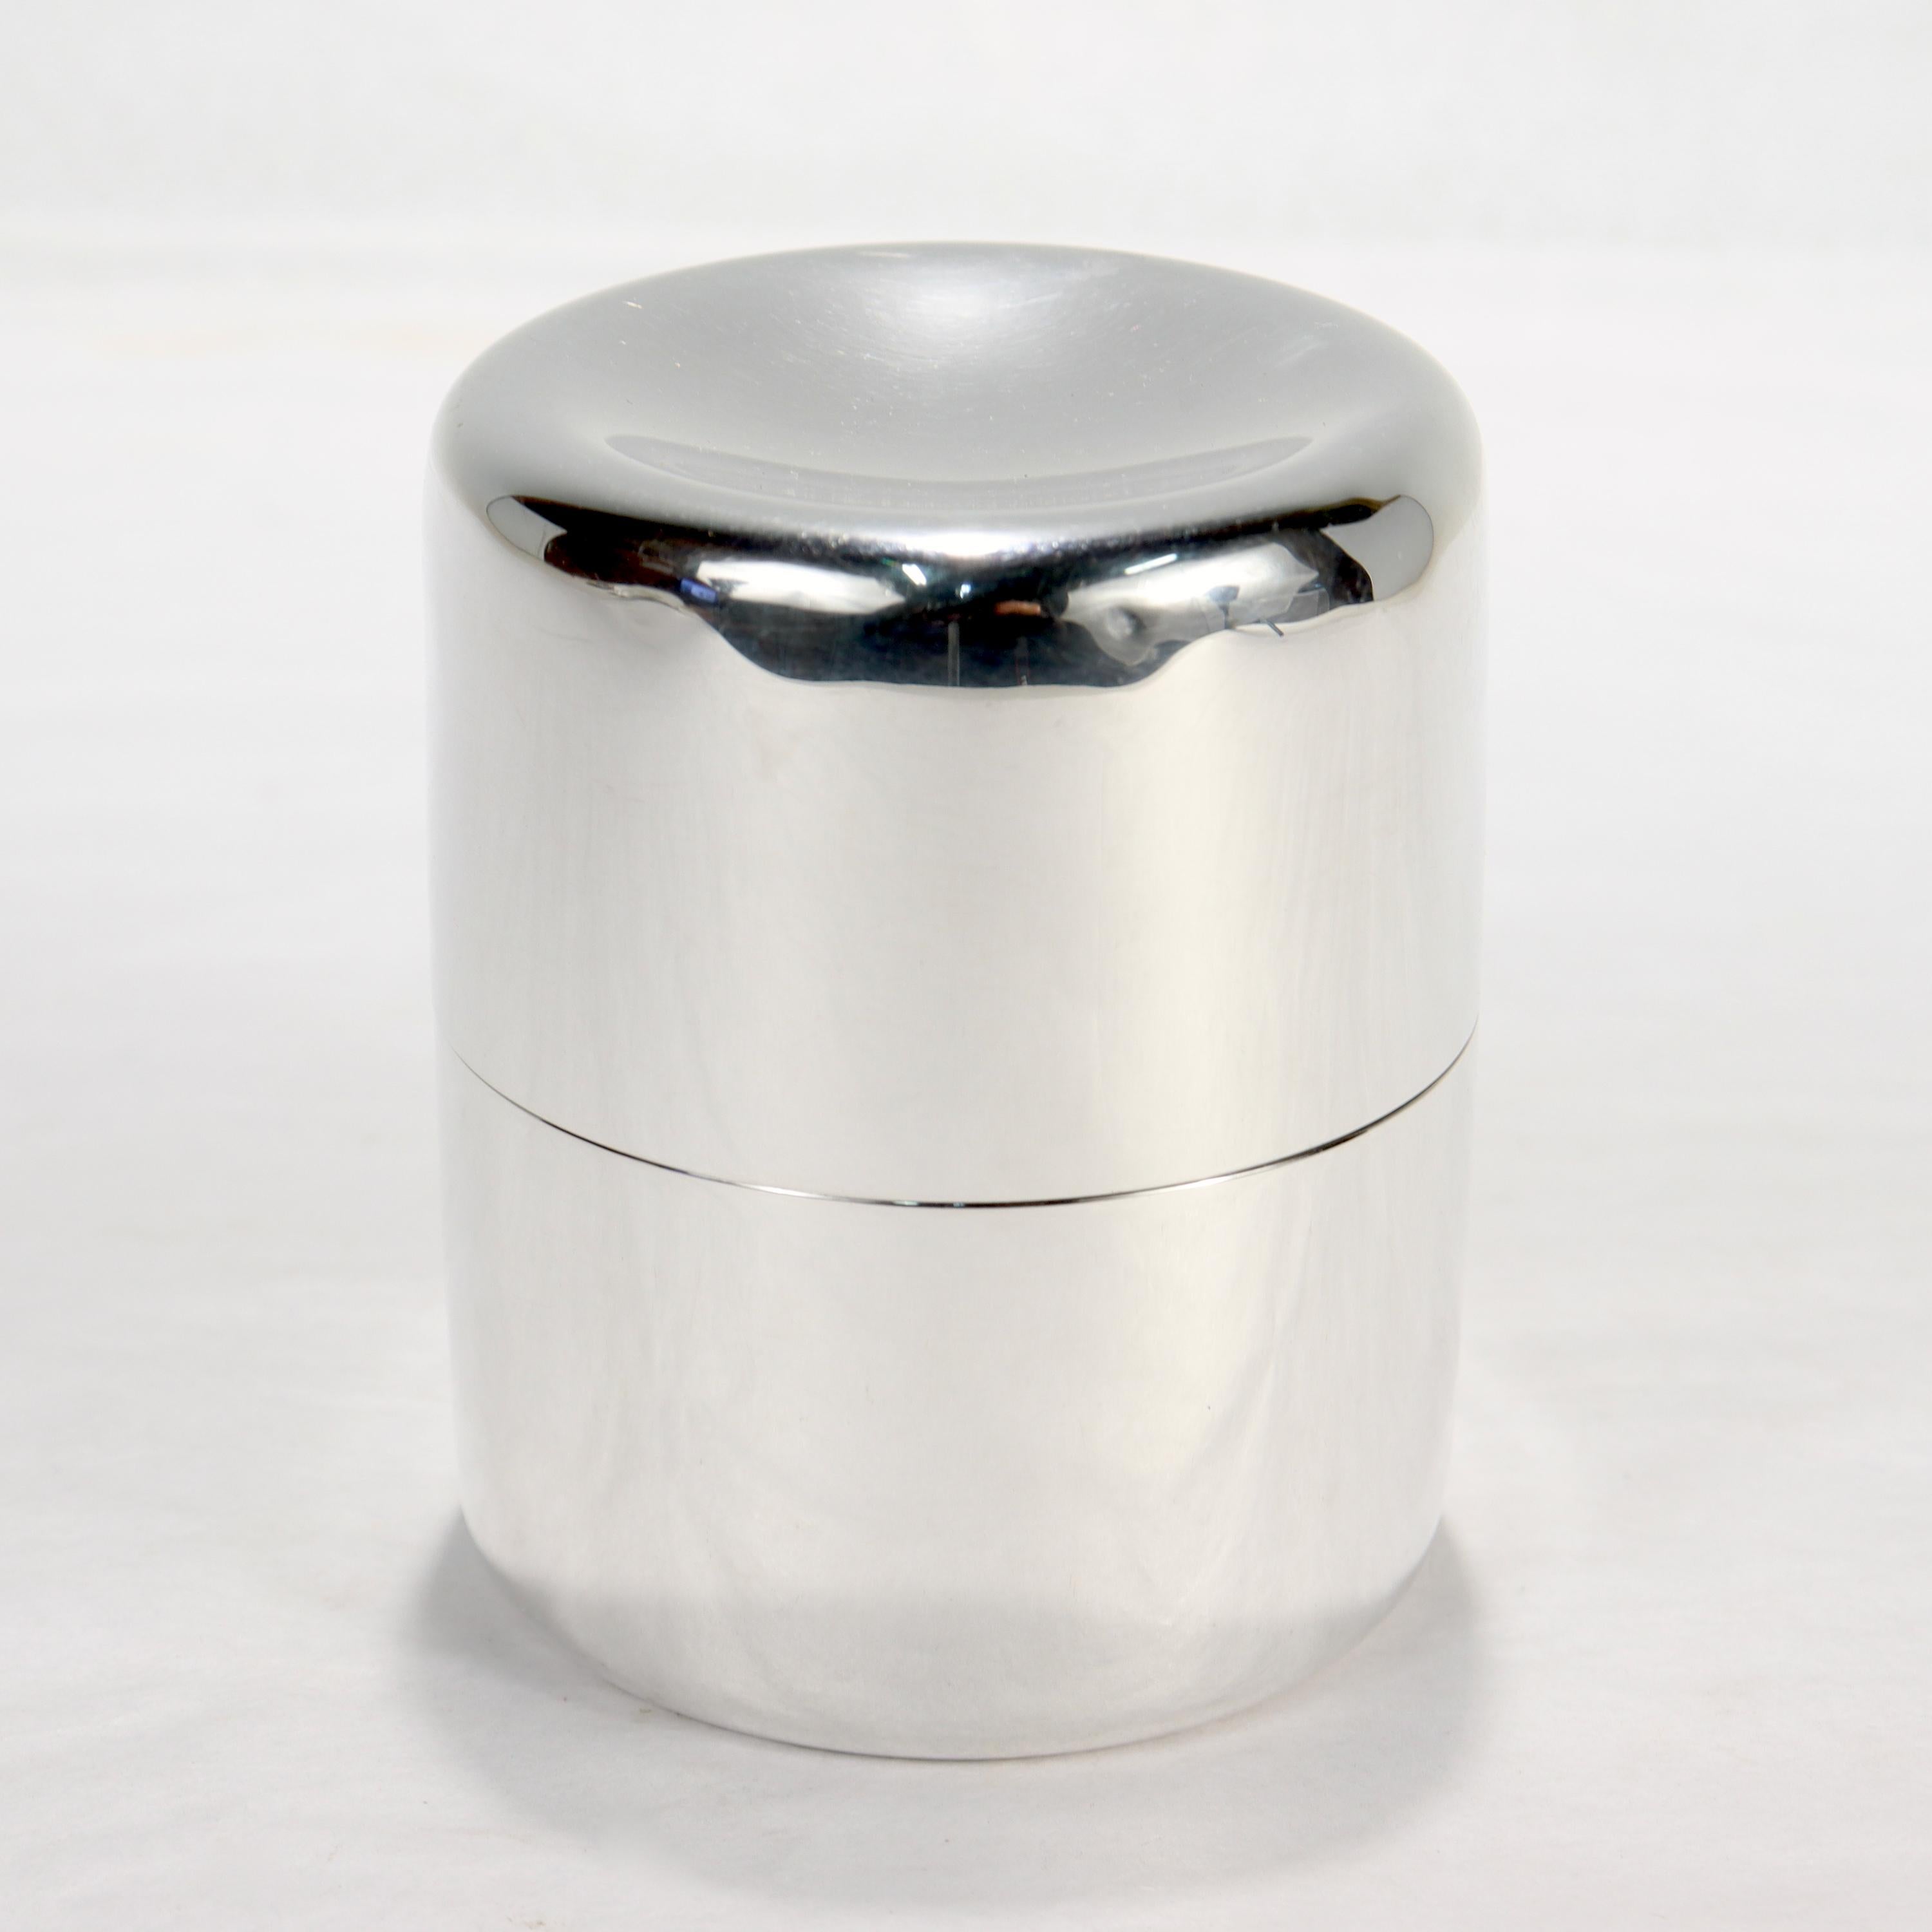 Danish Modern Sterling Silver Tea Caddy or Covered Box by Anton Michelsen 1